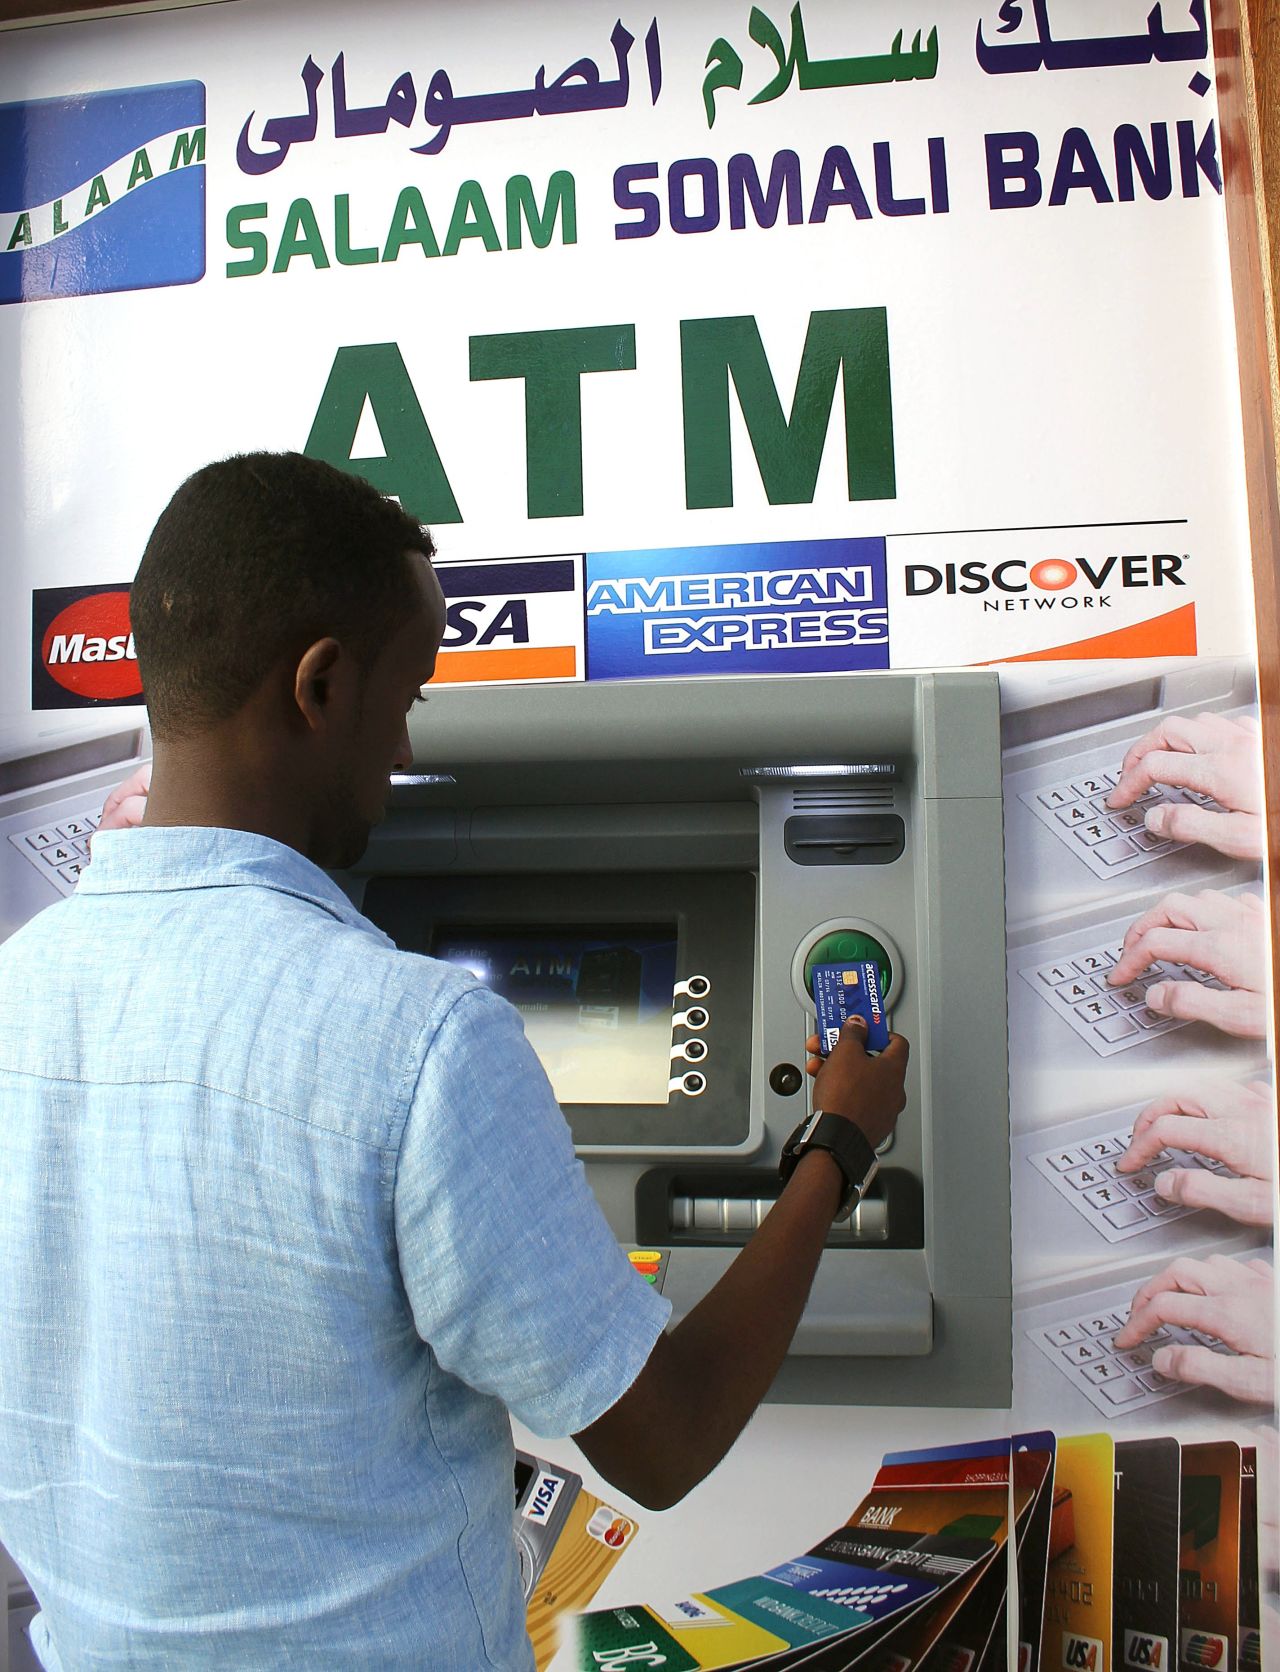 The first-ever cash withdrawal machine in Mogadishu has been installed by the Salaam Somali Bank in an upmarket hotel. 